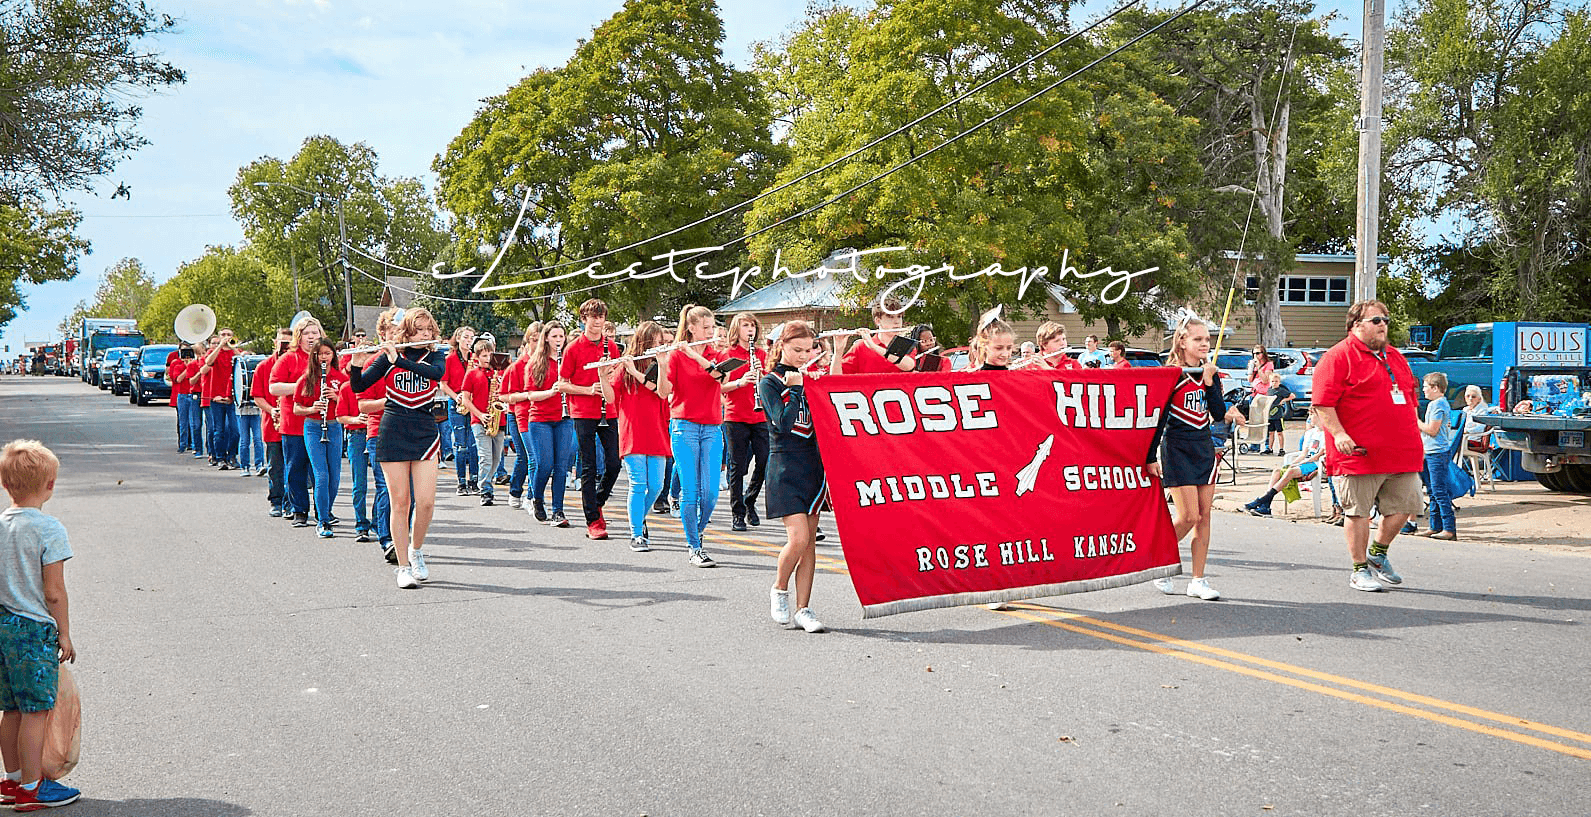 Rose Hill Middle School Band at parade